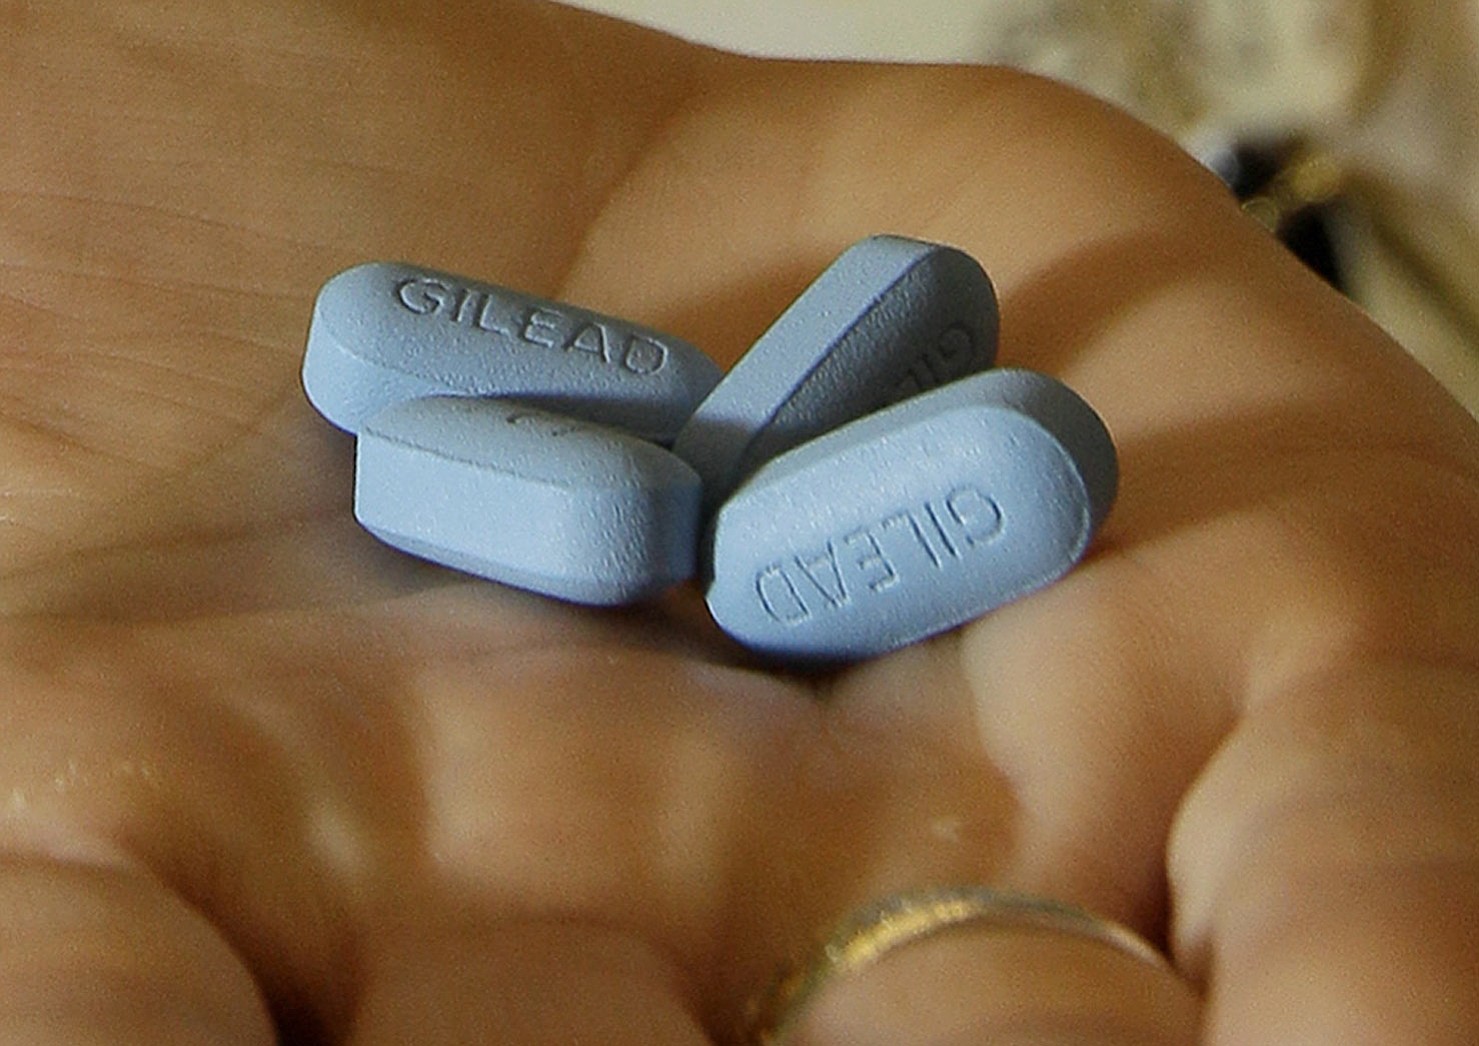 Truvada, used to treat HIV infection, also can help prevent it when taken before and after risky sex by gay men.